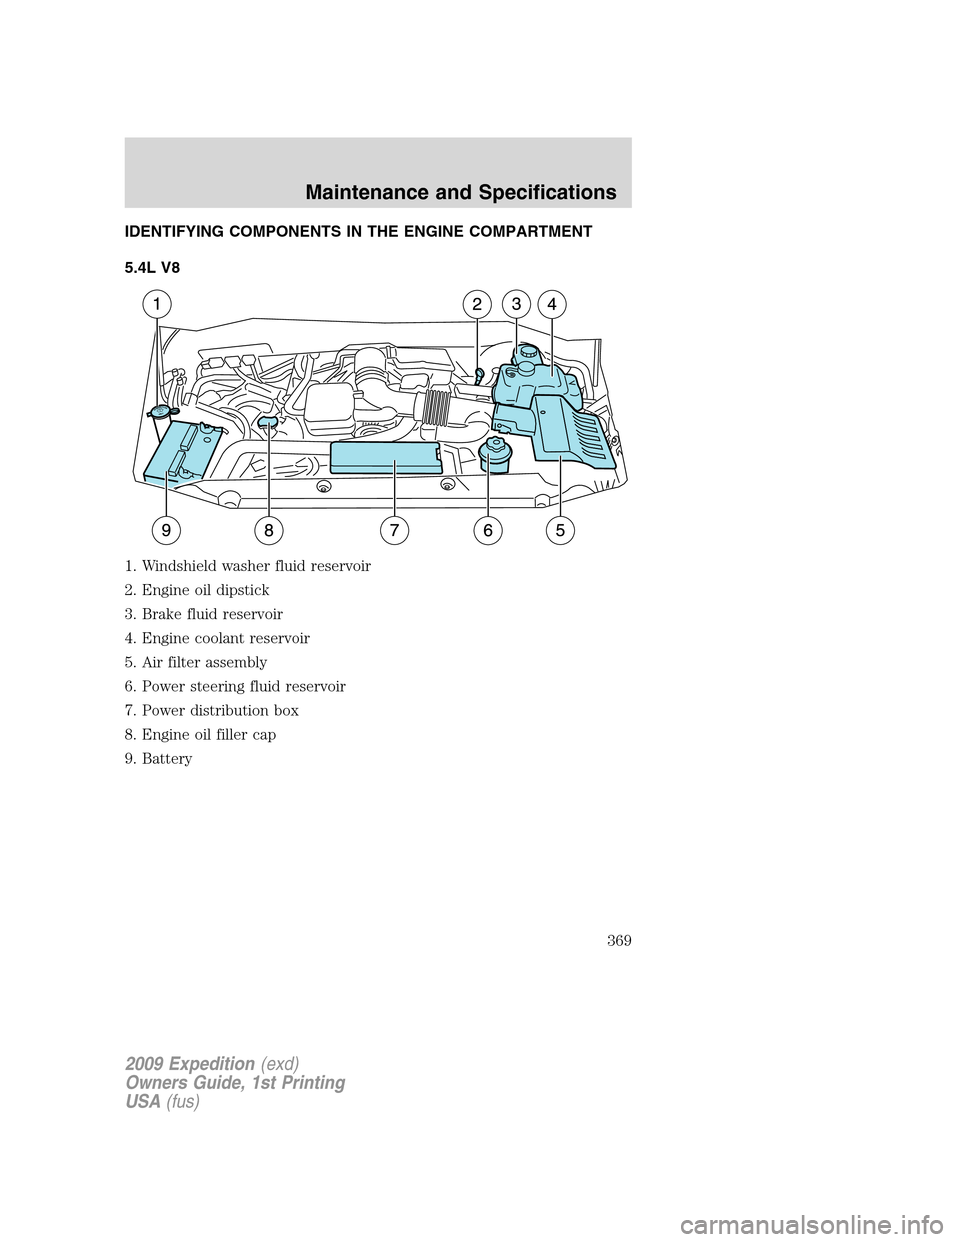 FORD EXPEDITION 2009 3.G Owners Manual IDENTIFYING COMPONENTS IN THE ENGINE COMPARTMENT
5.4L V8
1. Windshield washer fluid reservoir
2. Engine oil dipstick
3. Brake fluid reservoir
4. Engine coolant reservoir
5. Air filter assembly
6. Powe